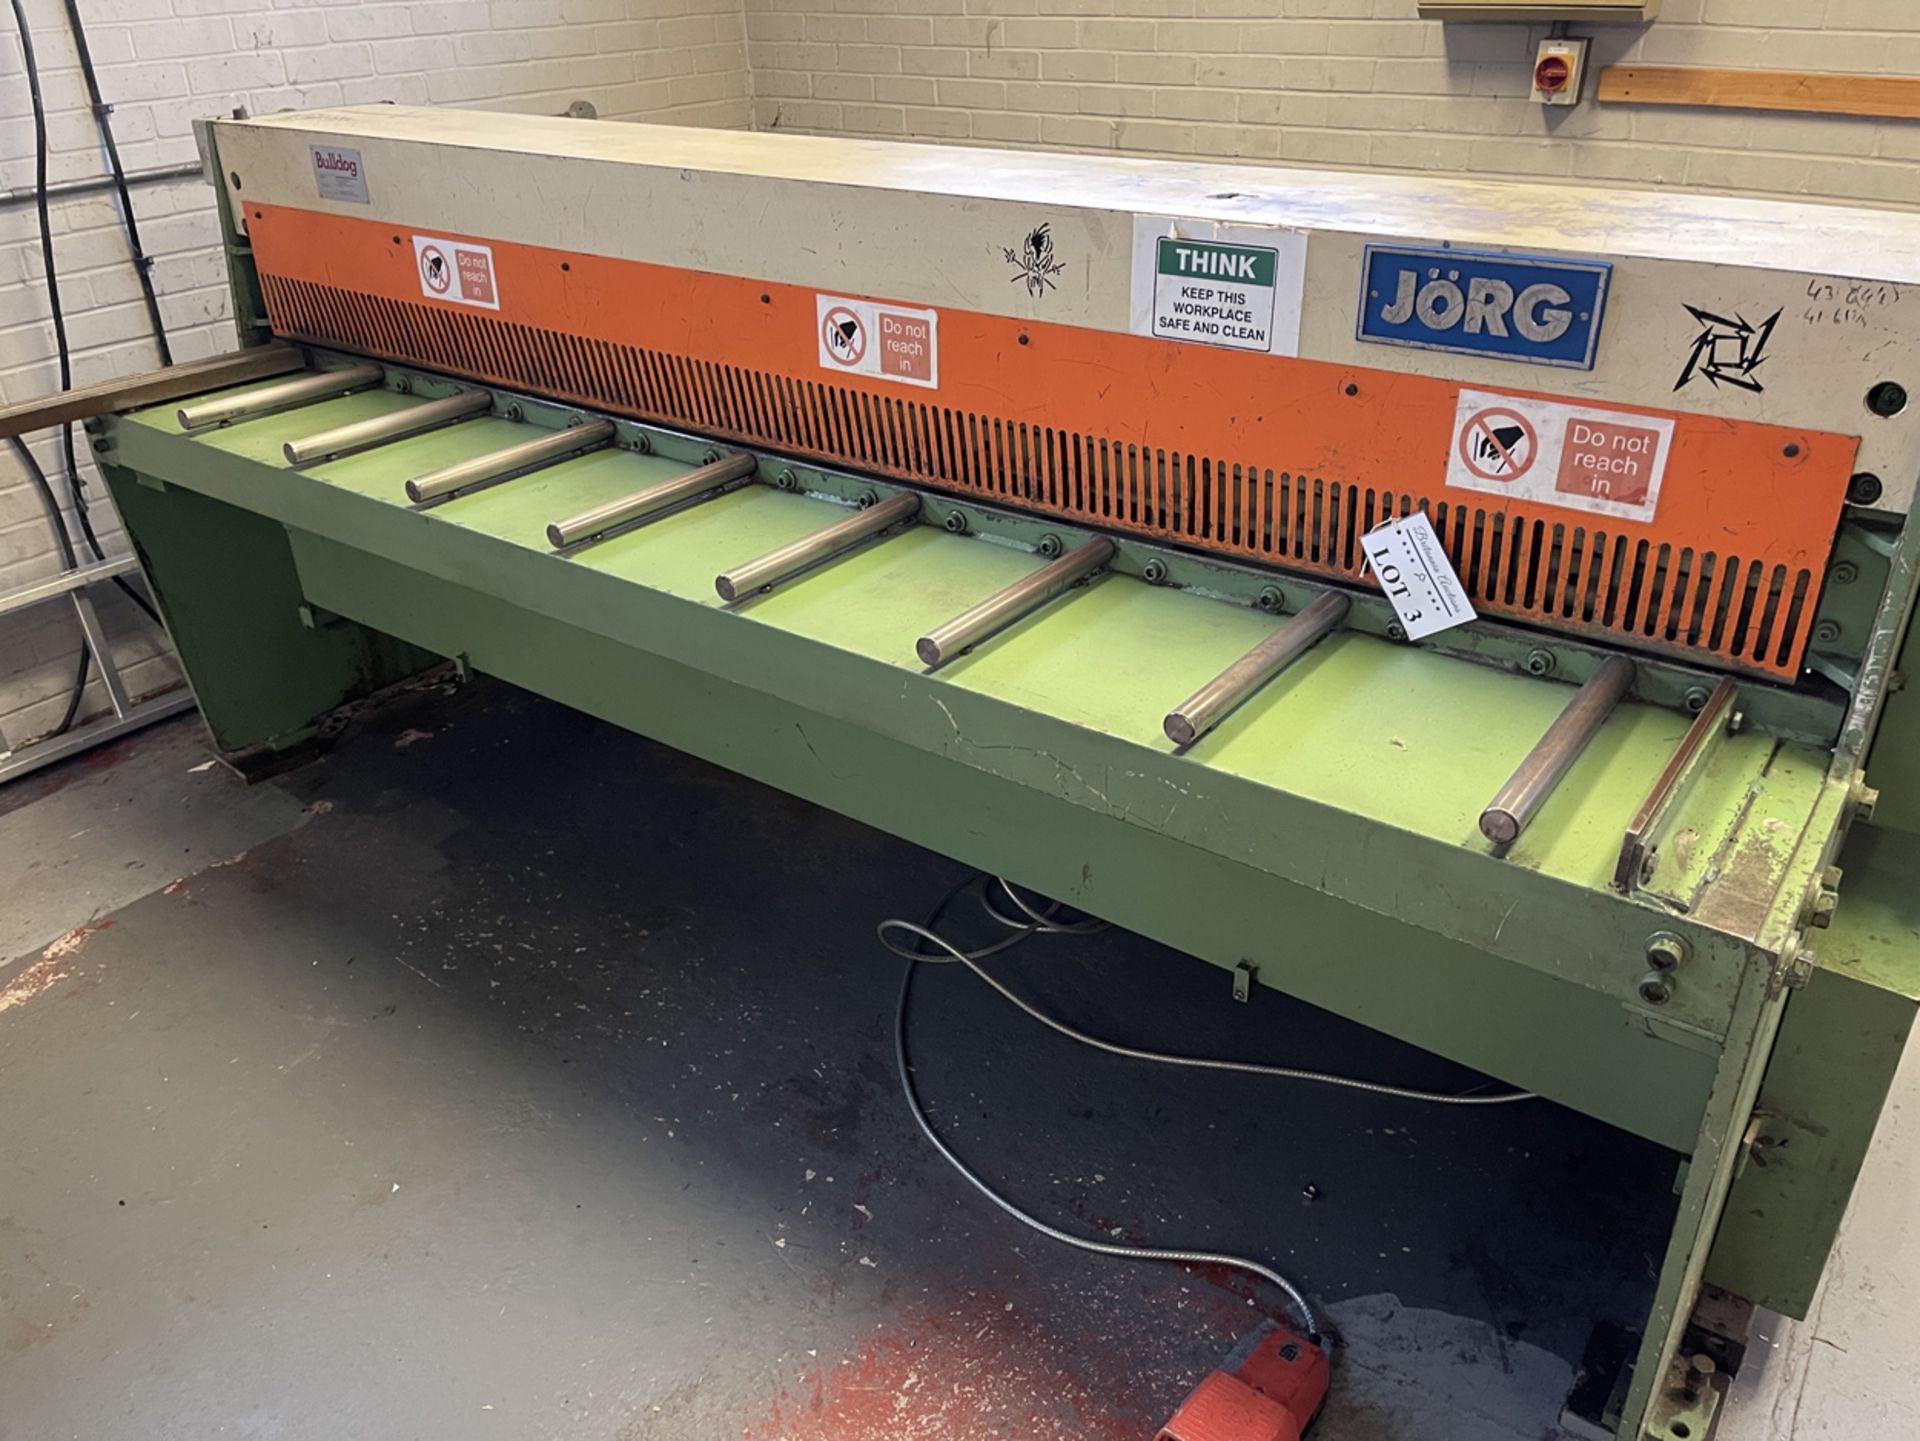 Jorg Type 4055 Direct Drive Power Guillotine. Capacity 3mm x 2550mm. - Image 2 of 5